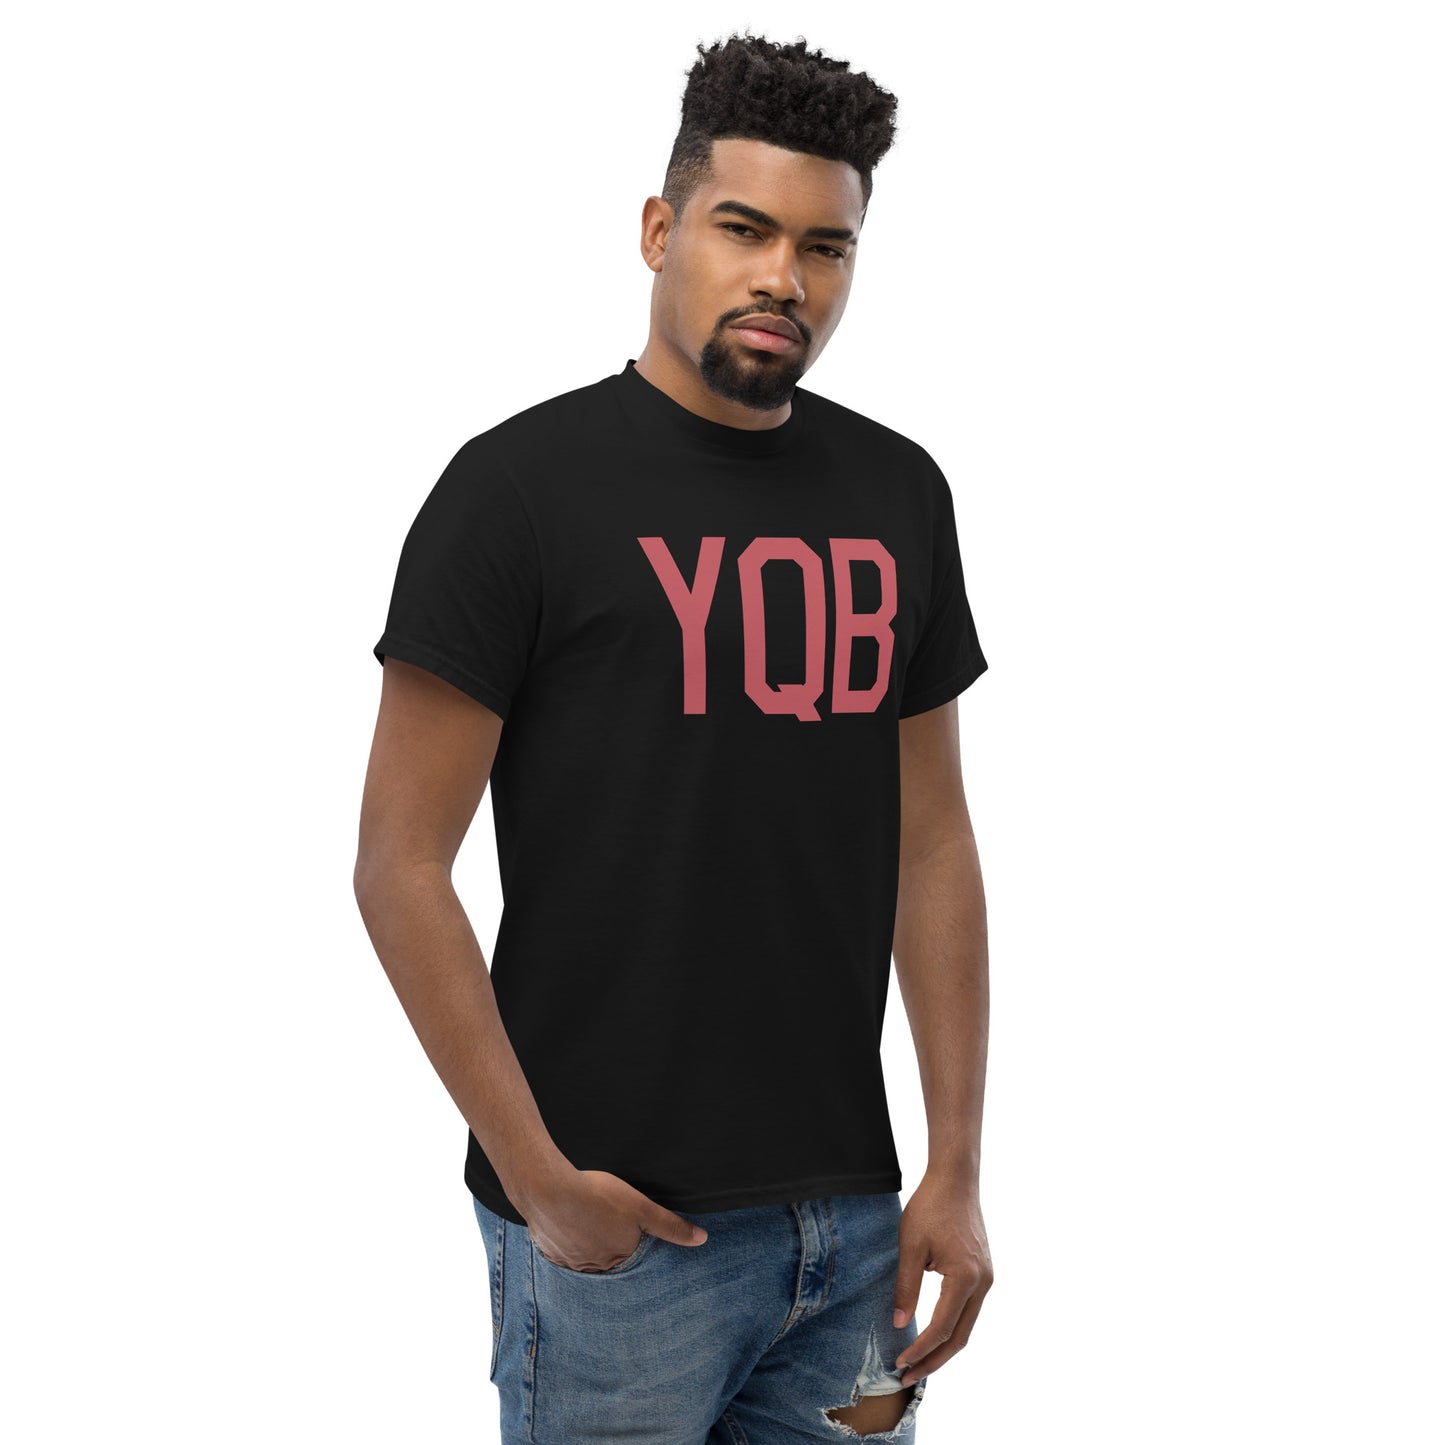 Aviation Enthusiast Men's Tee - Deep Pink Graphic • YQB Quebec City • YHM Designs - Image 08